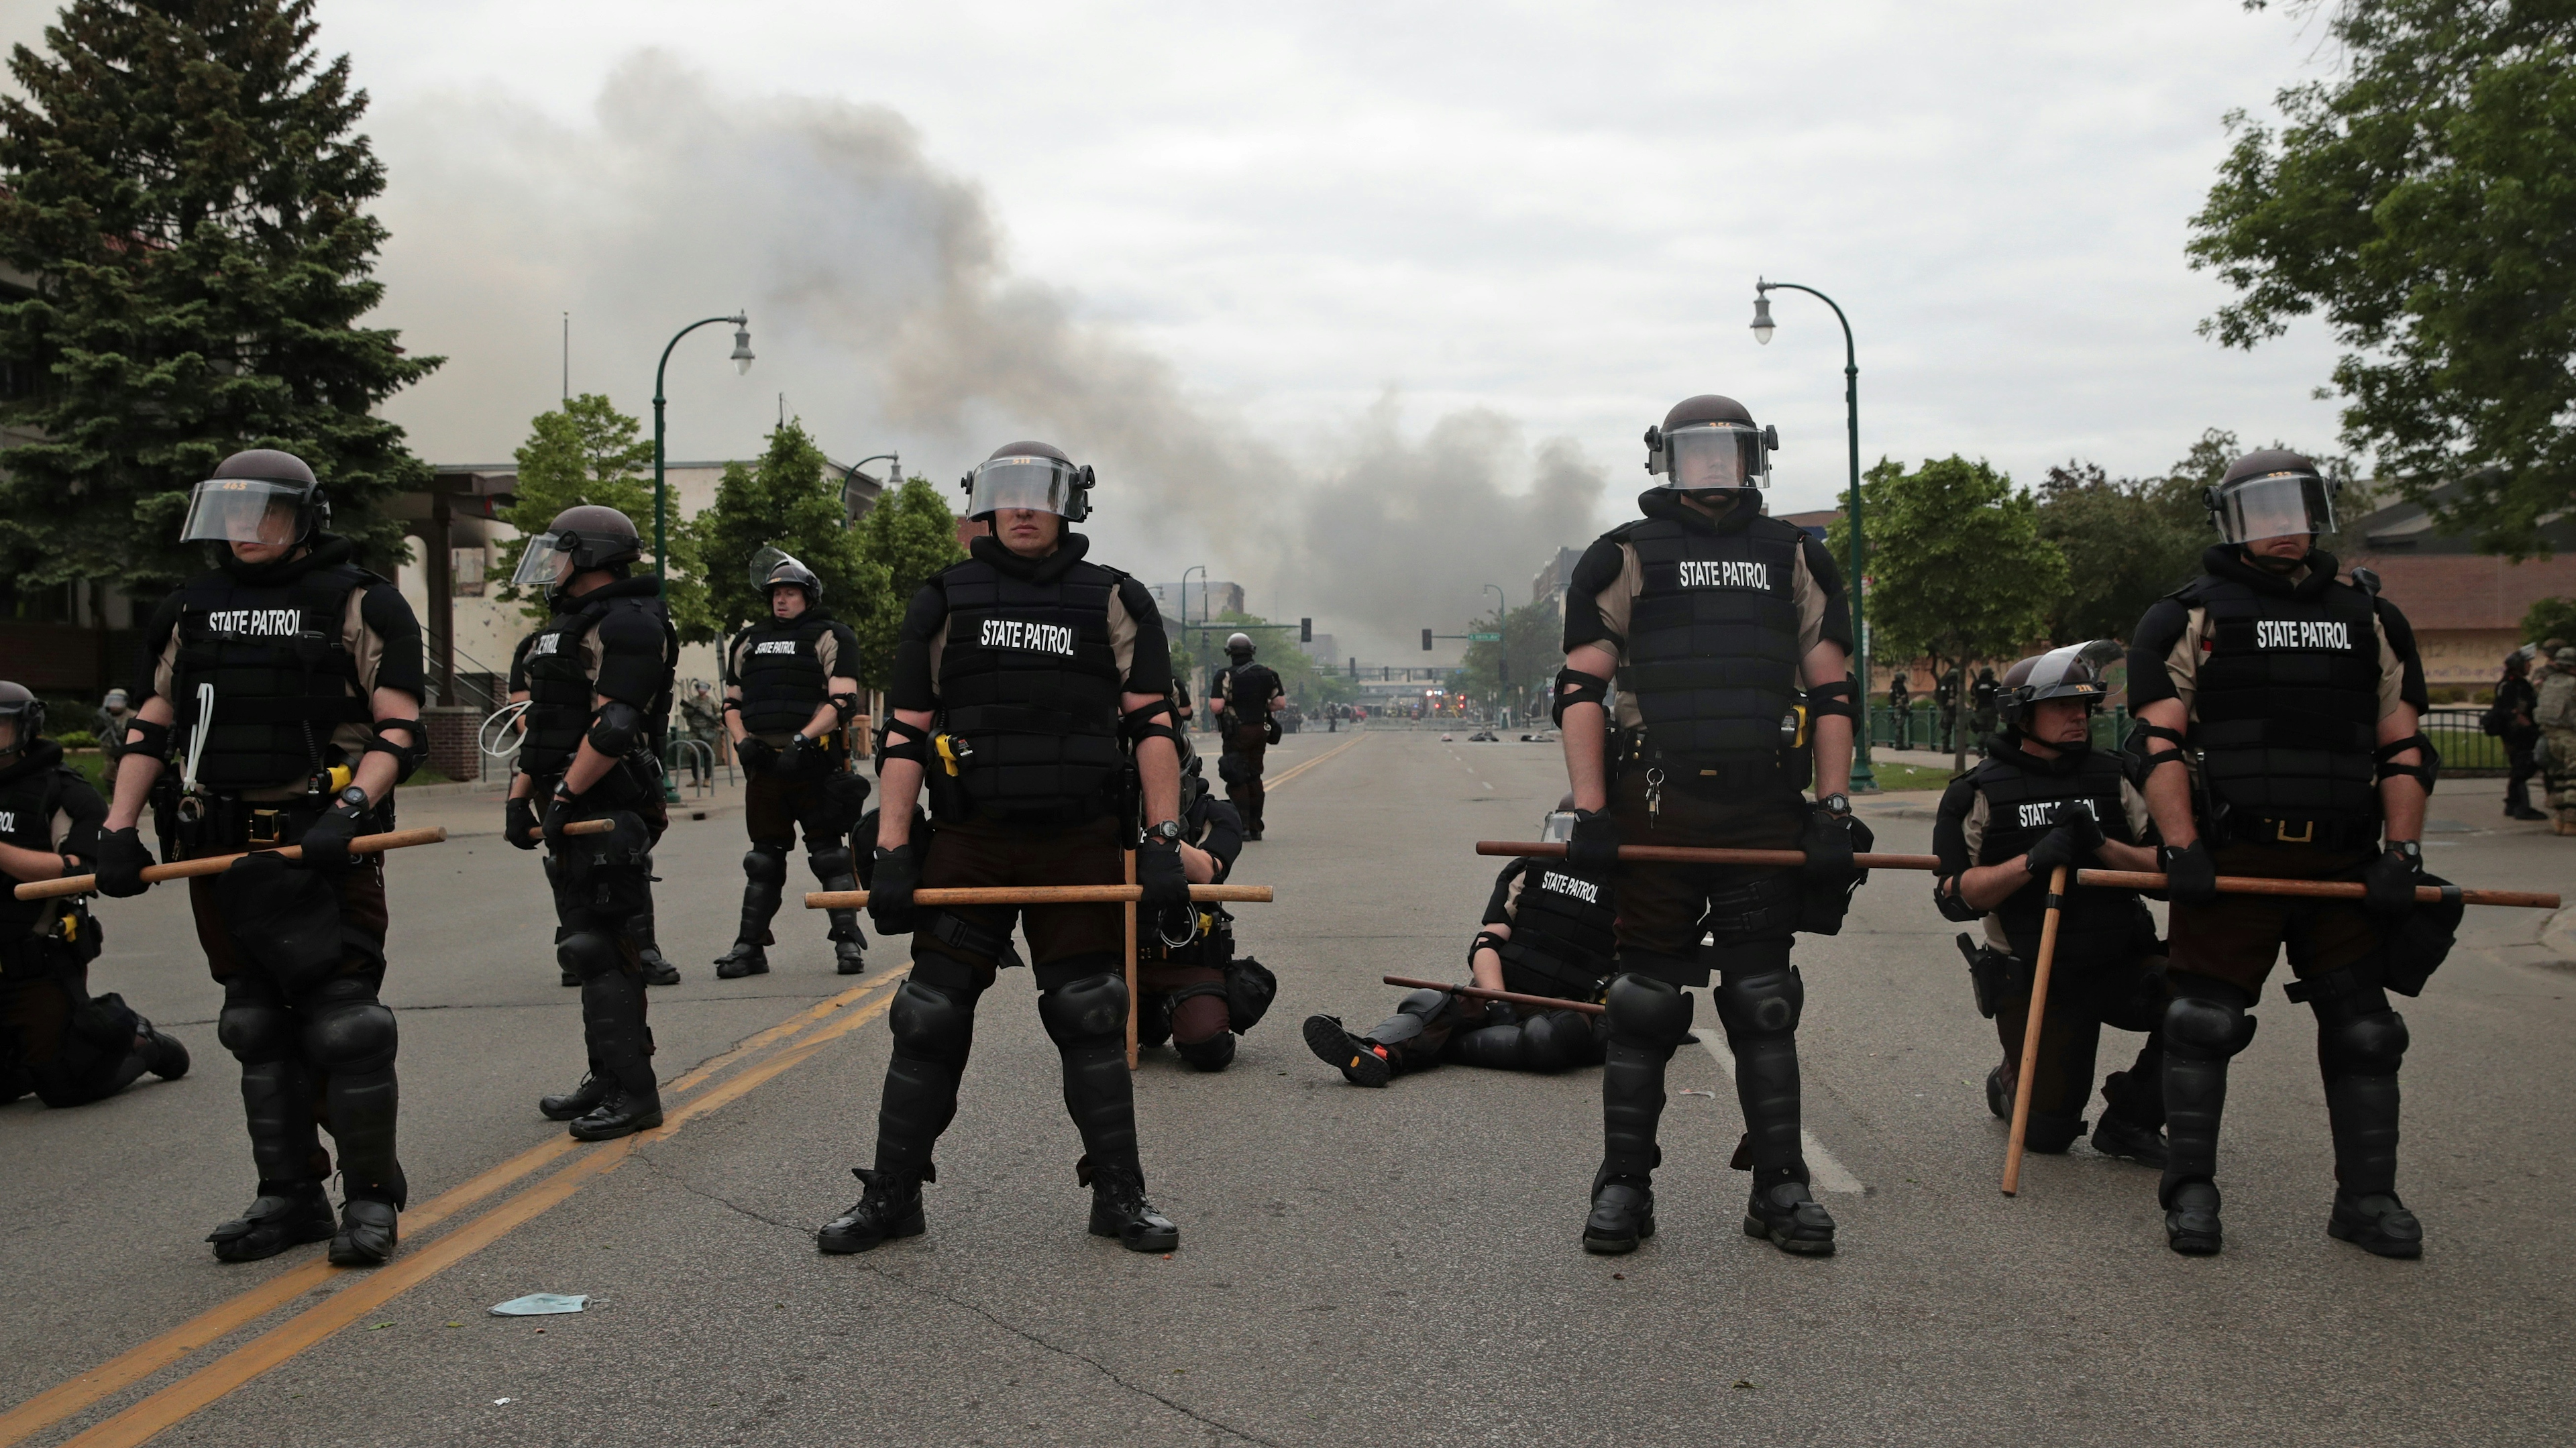 Police officers block a road on the fourth day of protests on May 29, 2020 in Minneapolis, Minnesota.